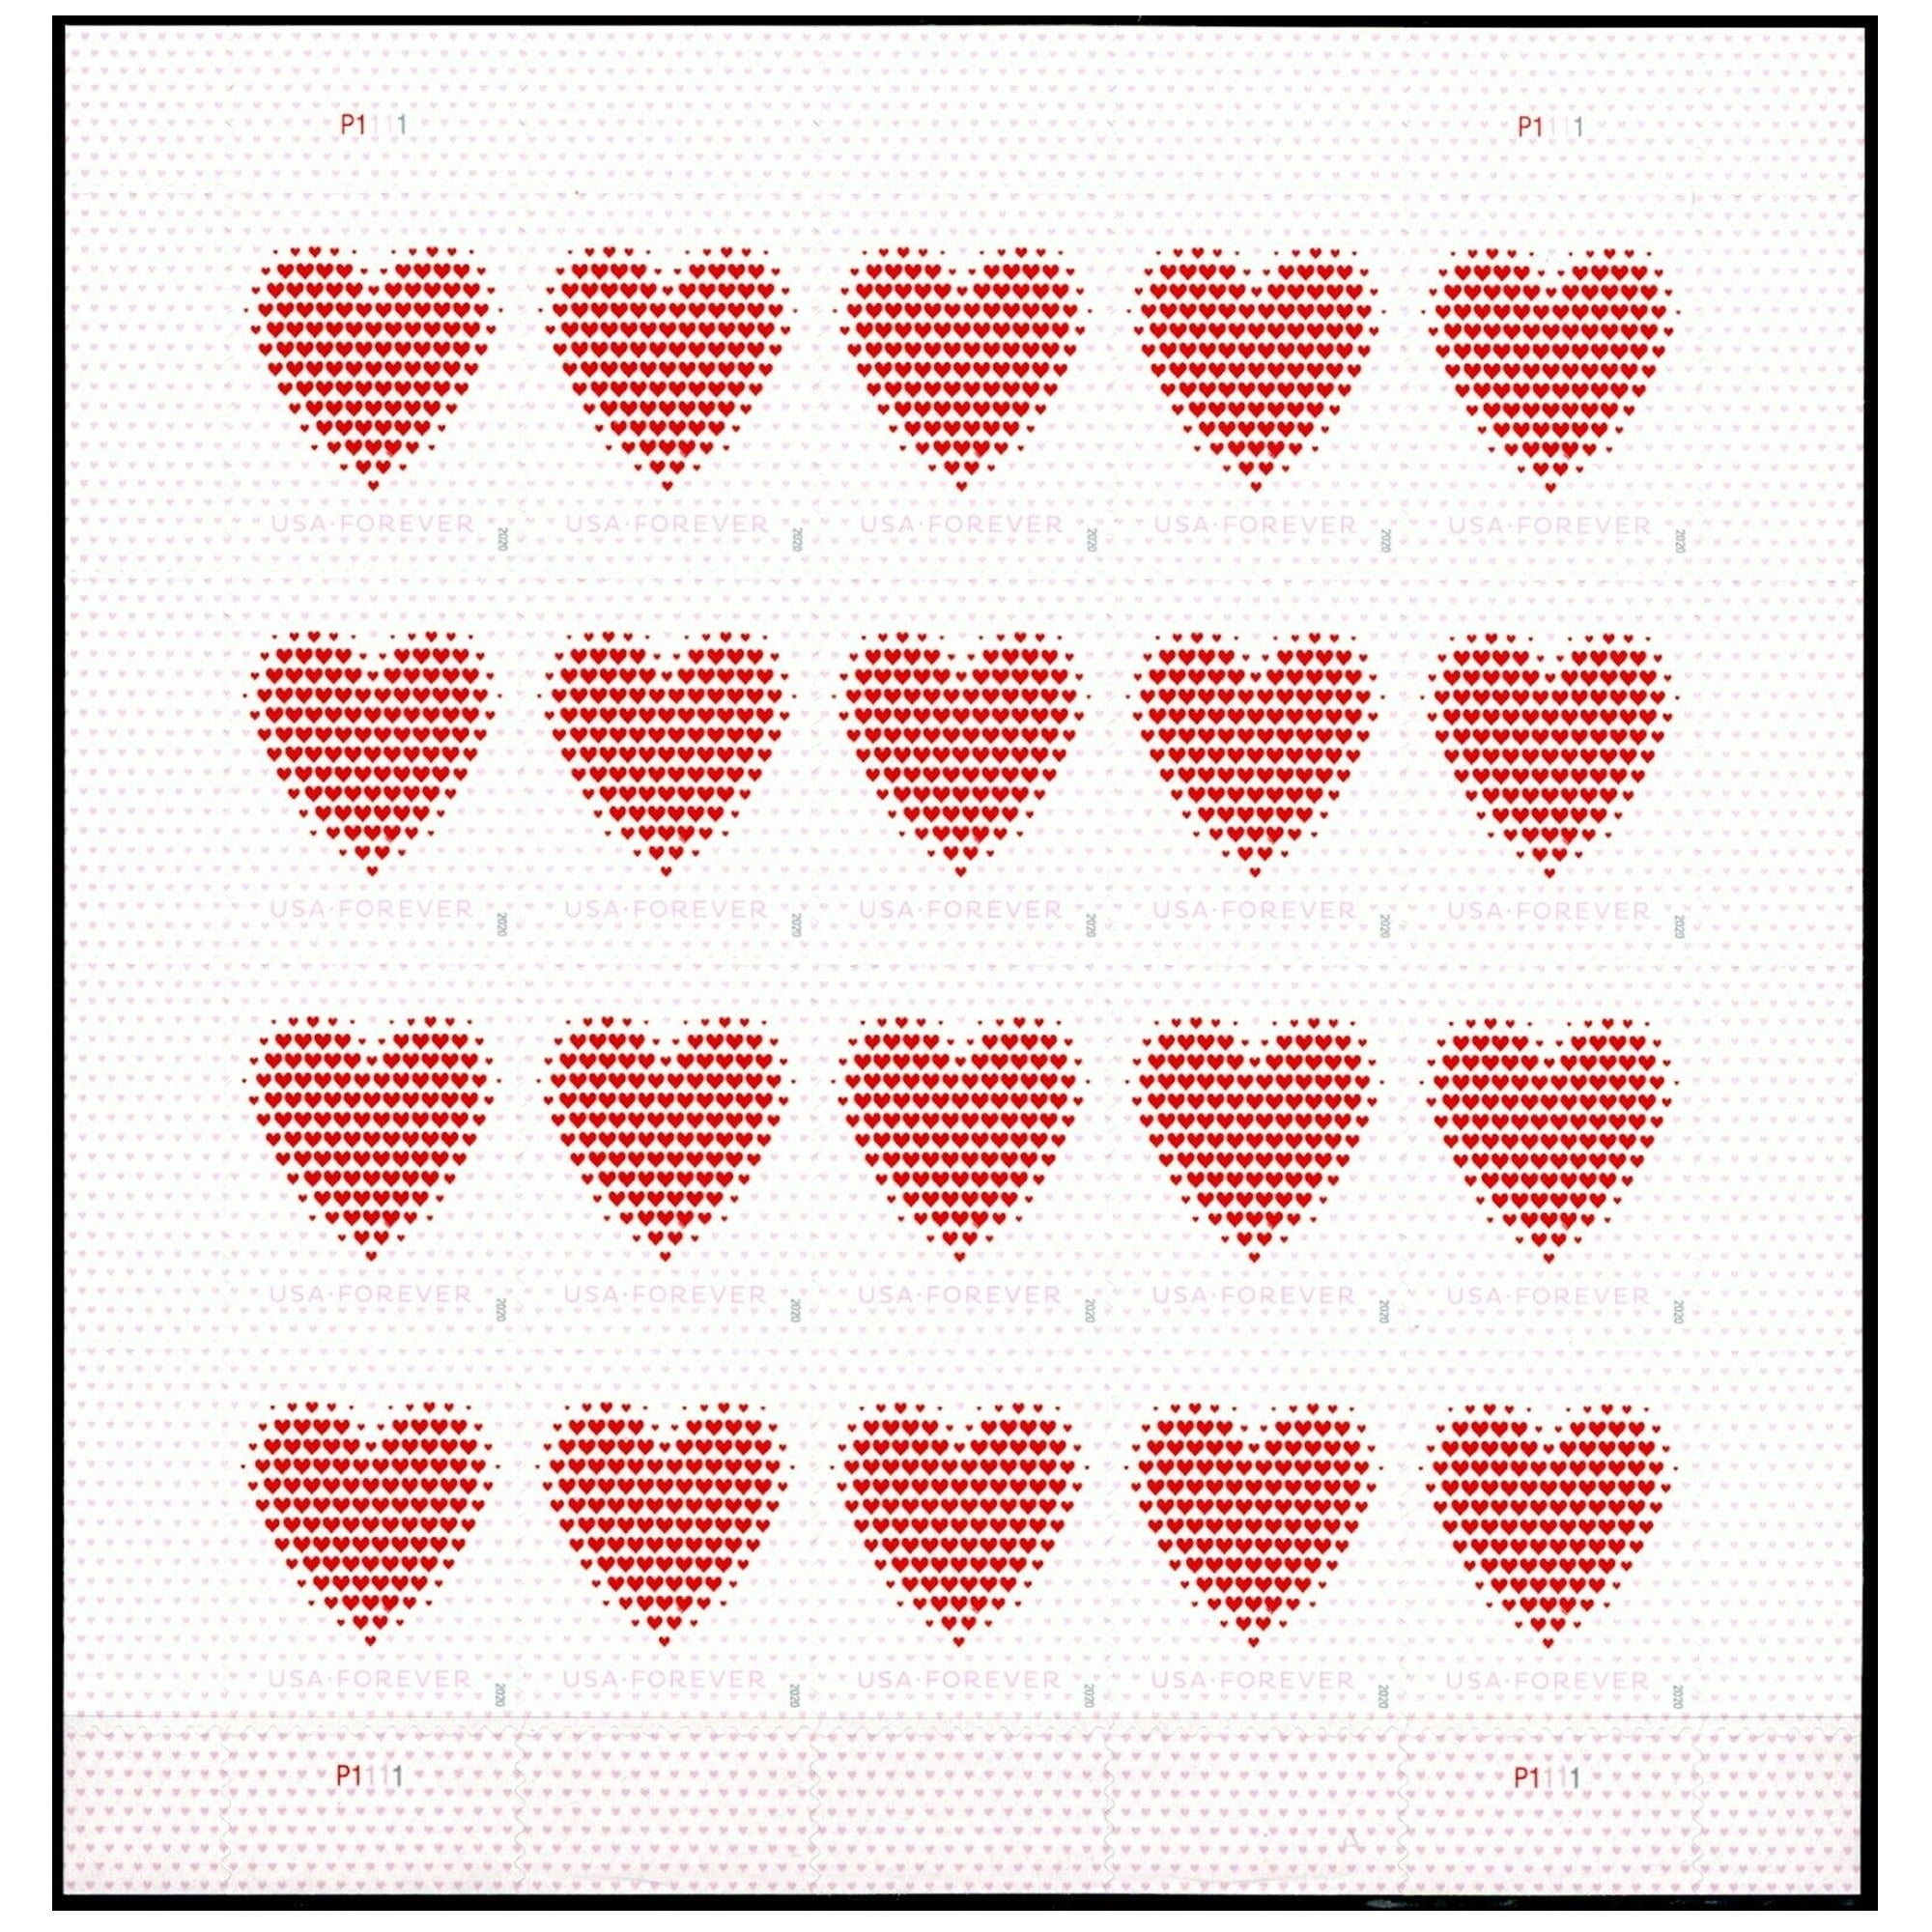 Made of Hearts Sheet of 20 USPS First Class Forever Postage Stamps Wedding Celebration